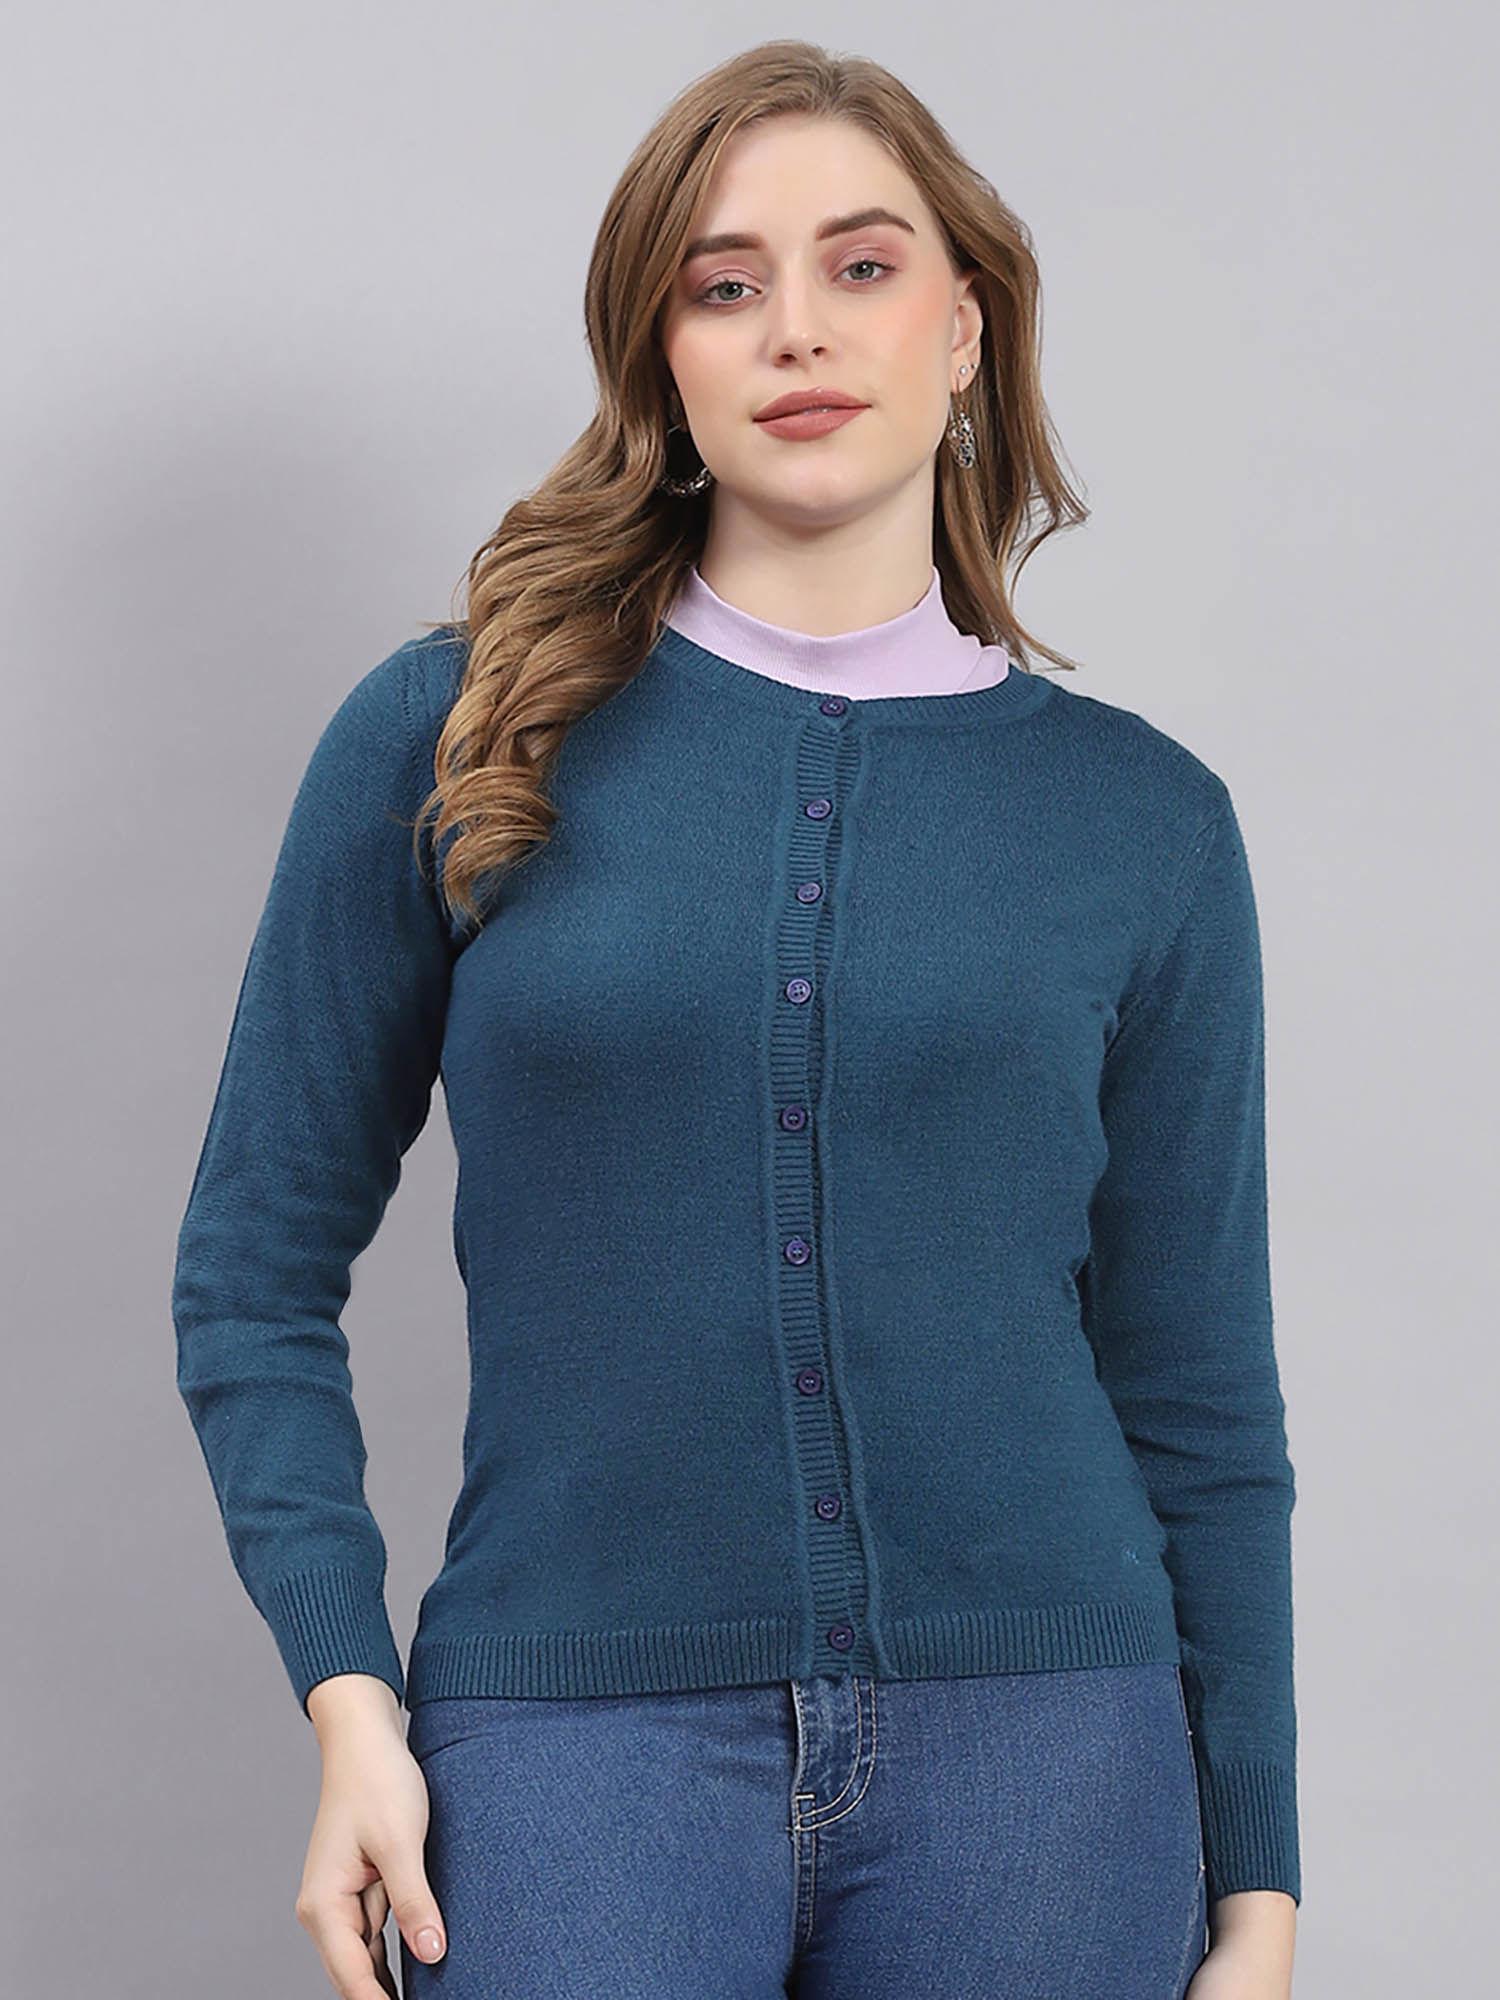 women-solid-full-sleeves-round-neck-teal-cardigan